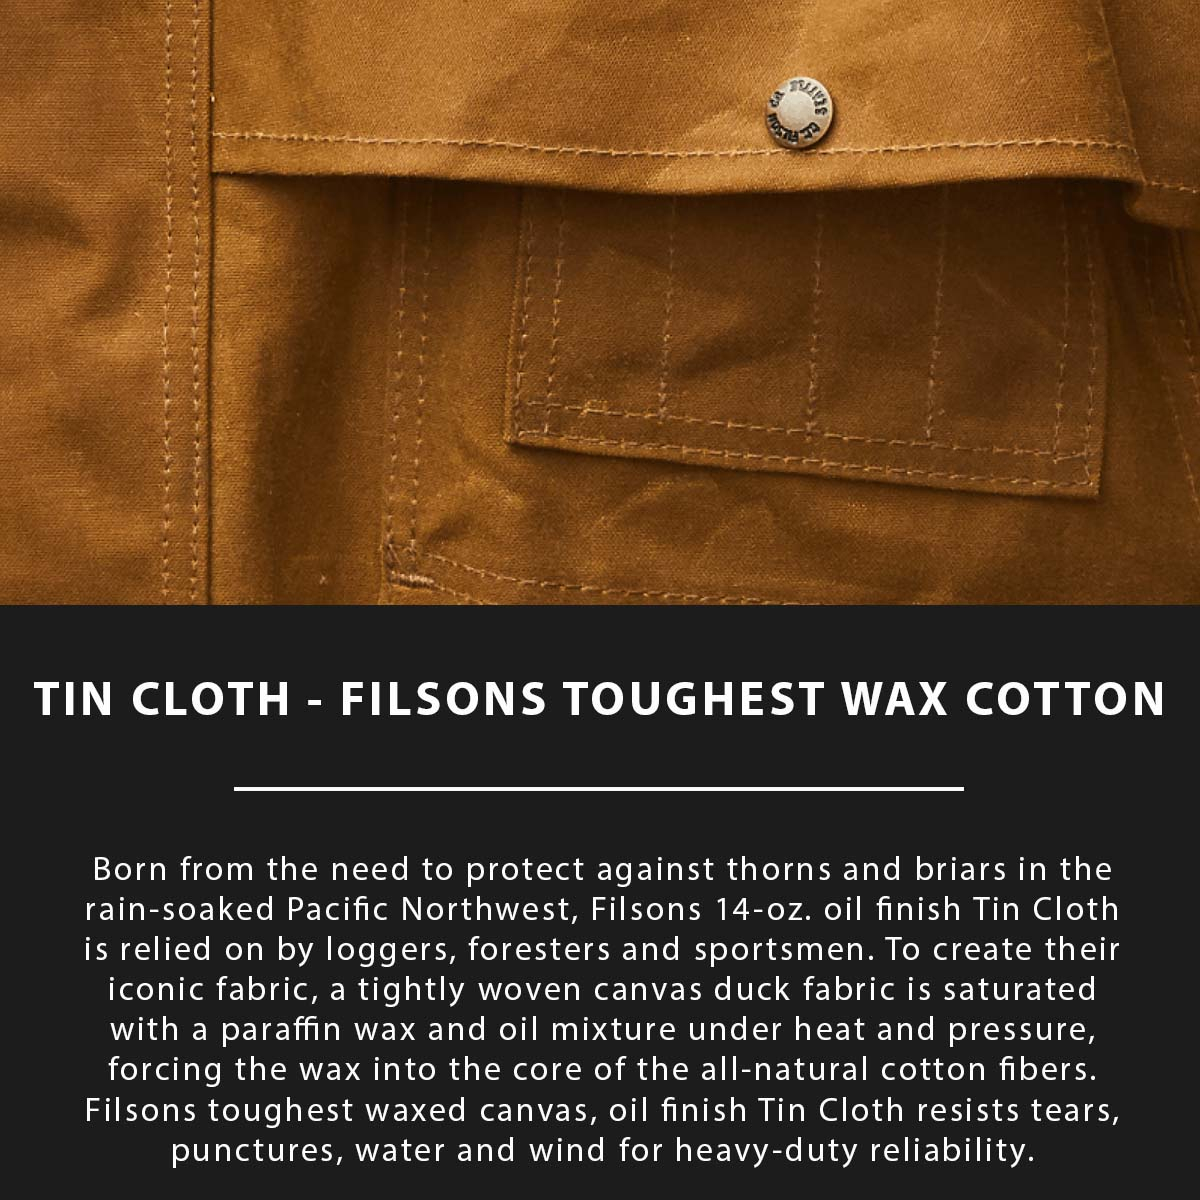 Filson Lined Tin Cloth Cruiser Jacket Cinder, made of the legendary super strong, lightweight, and oil impregnated 14-oz. Tin Cloth canvas